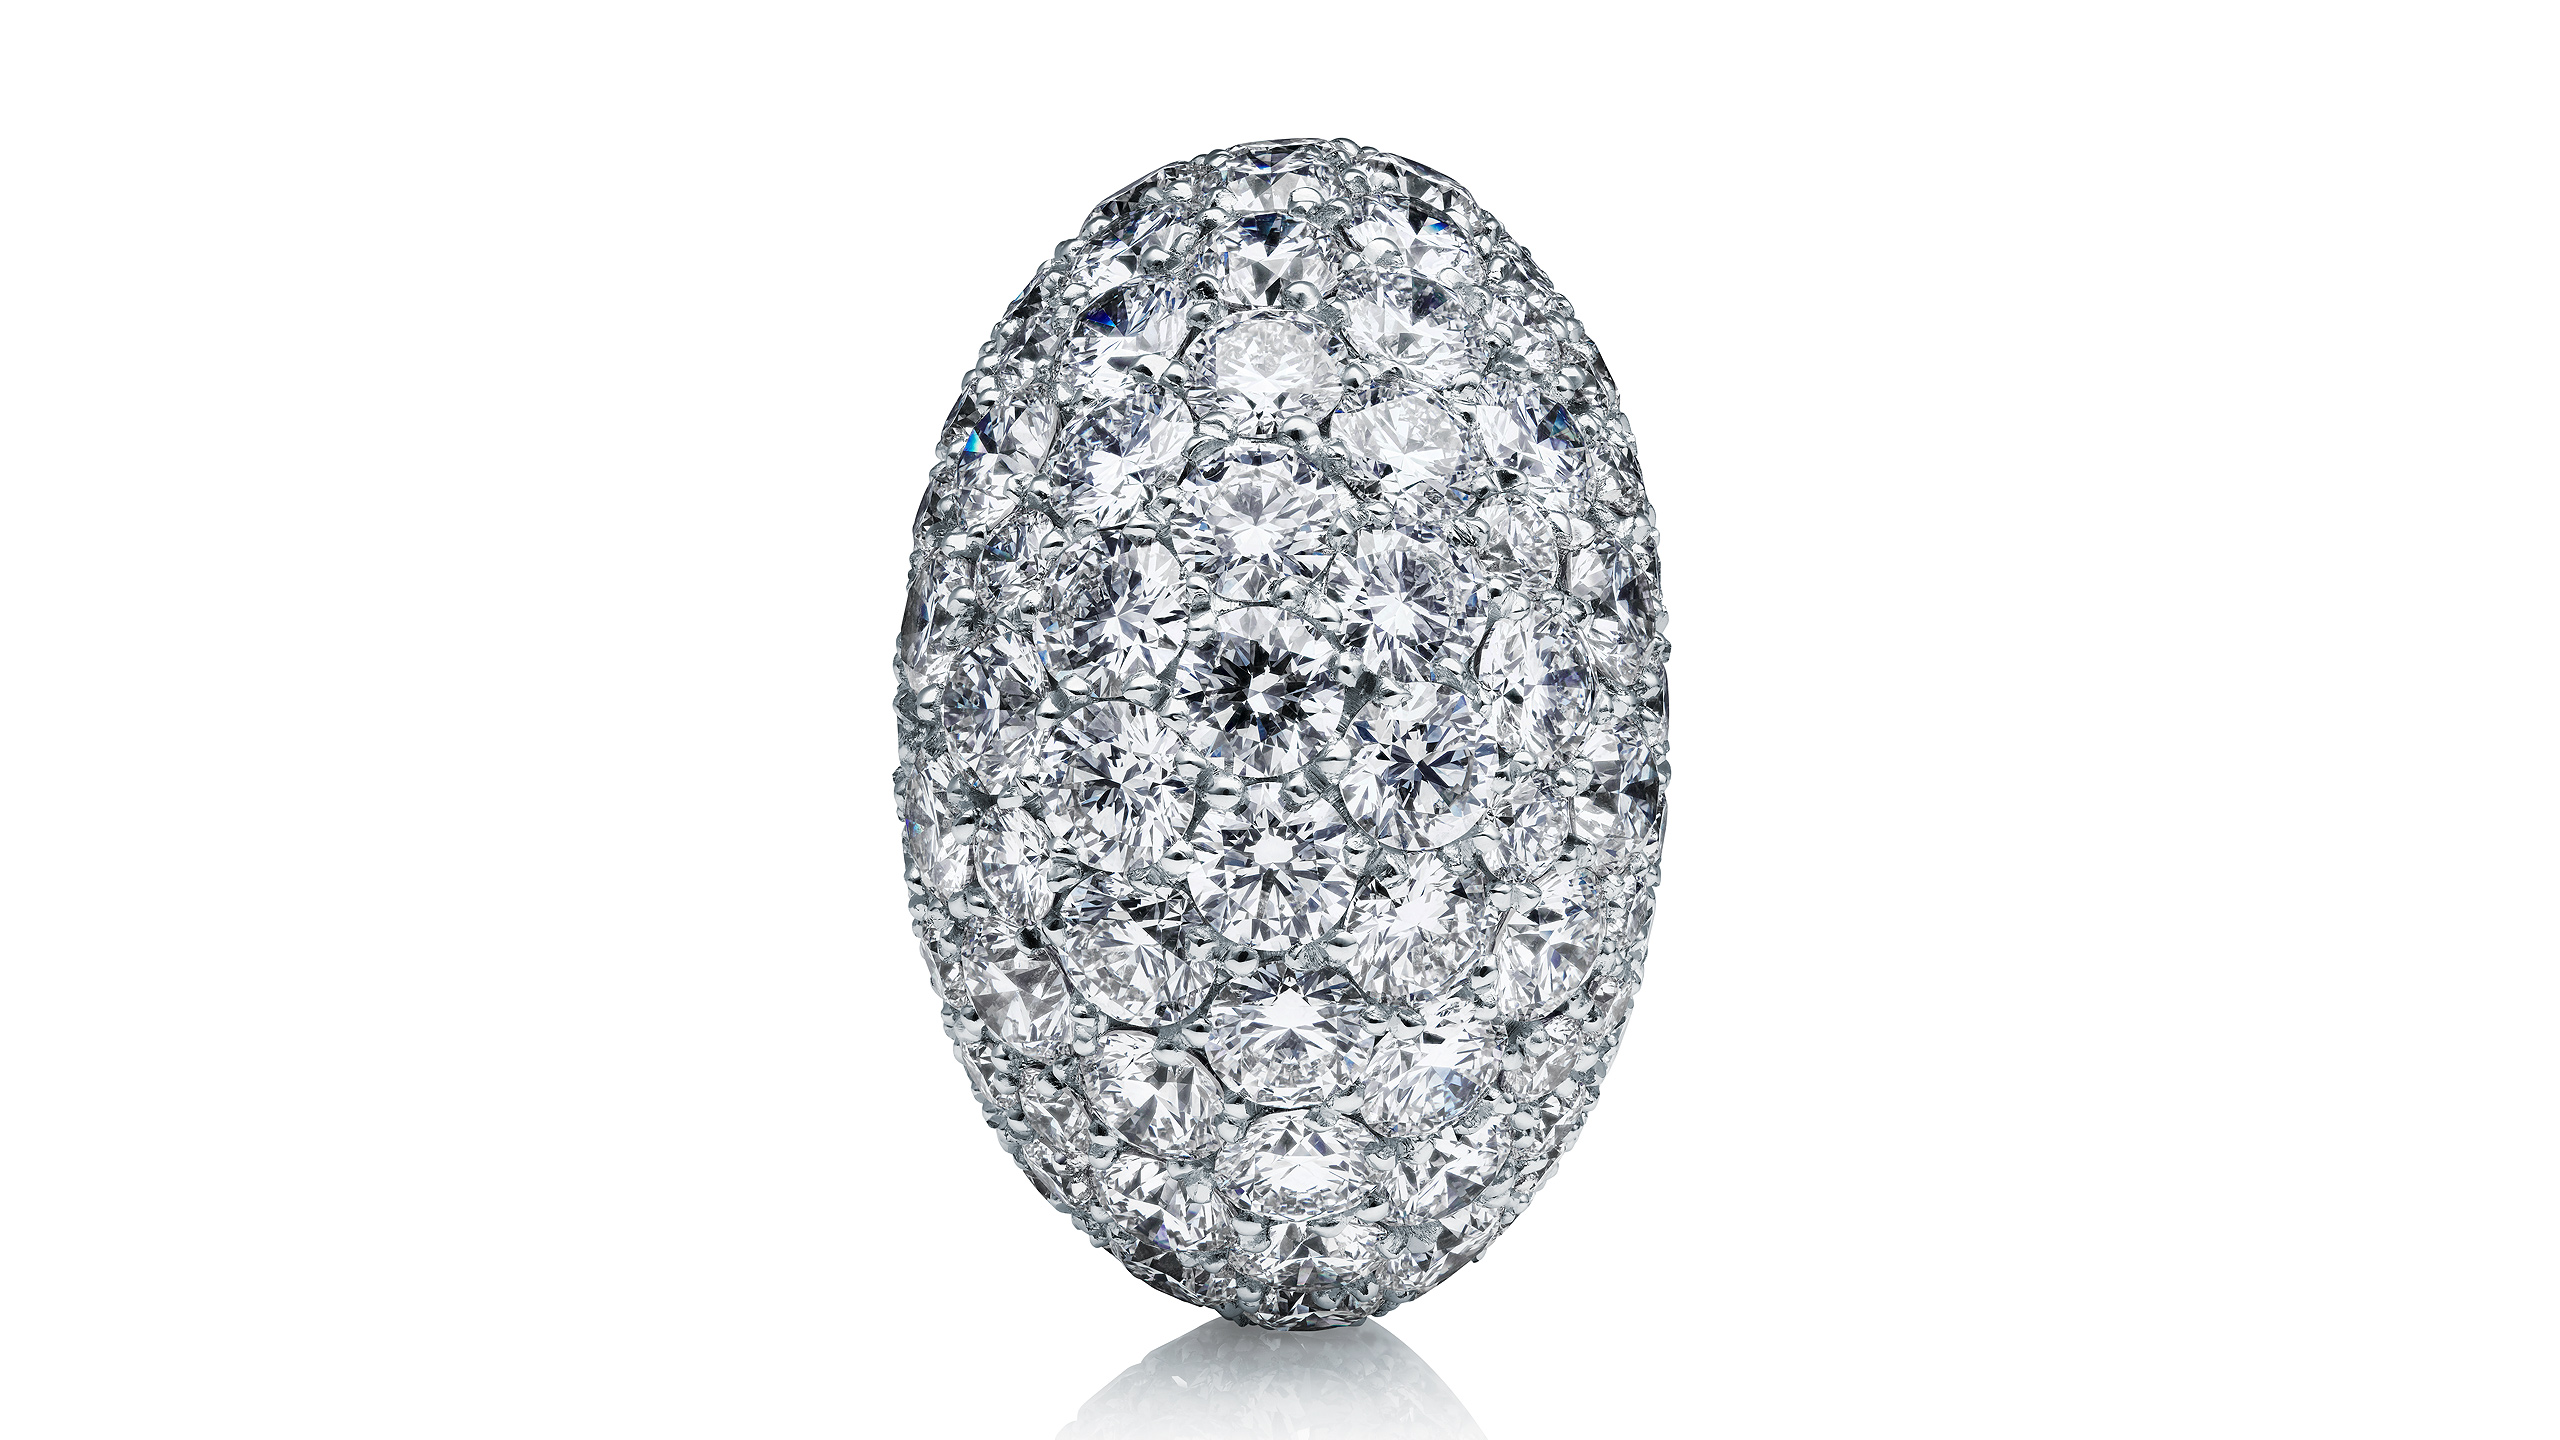 https://towejewels.com/wp-content/uploads/2015/06/Dune_ring_Diamond_top_ny_OK_2560x1440_overview_web.jpg